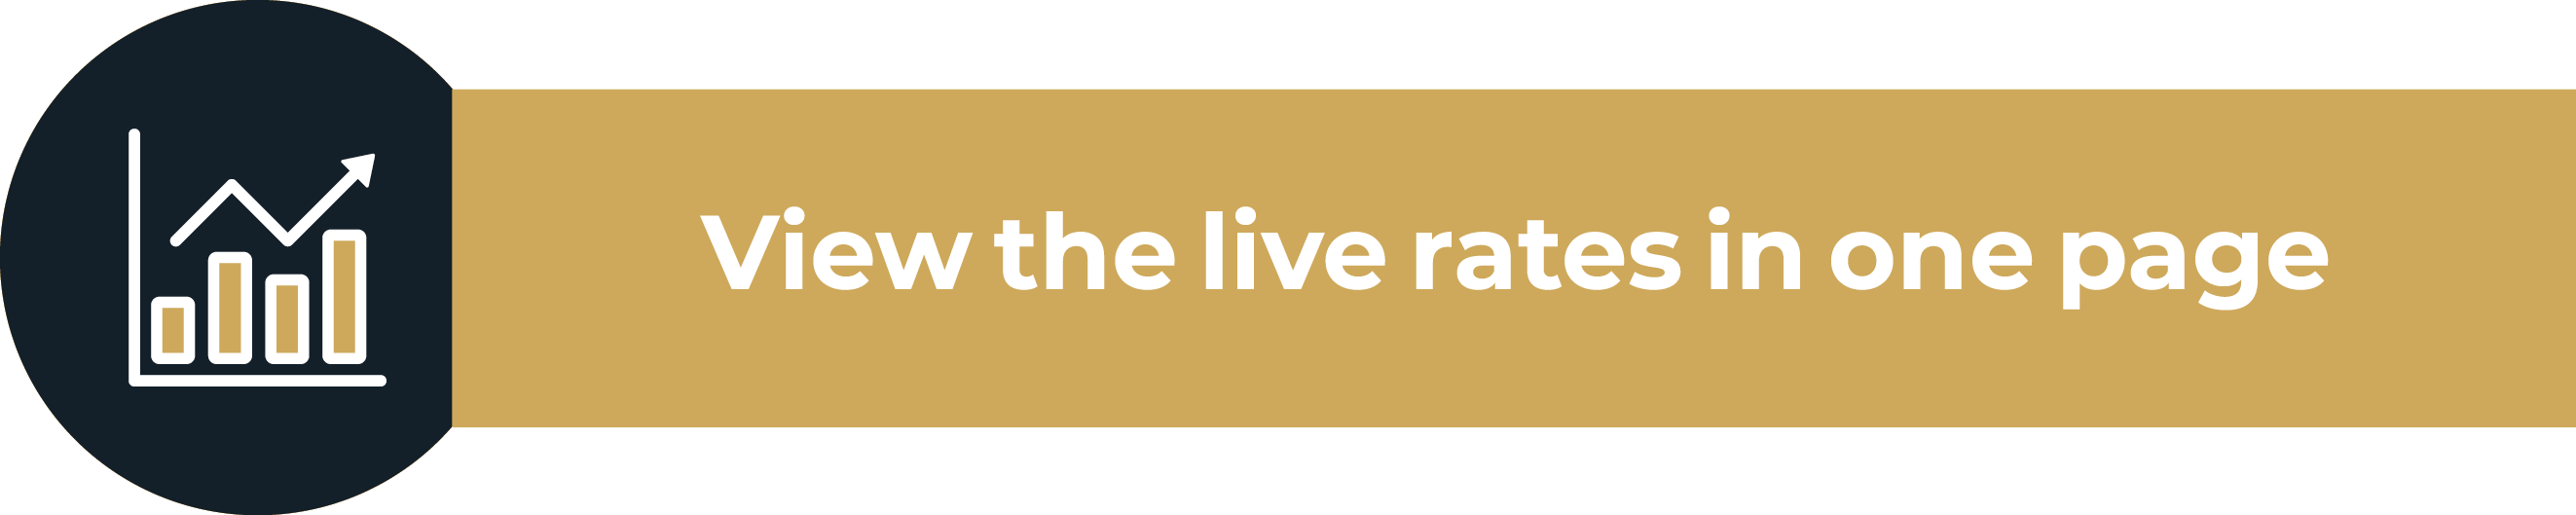 Live rate